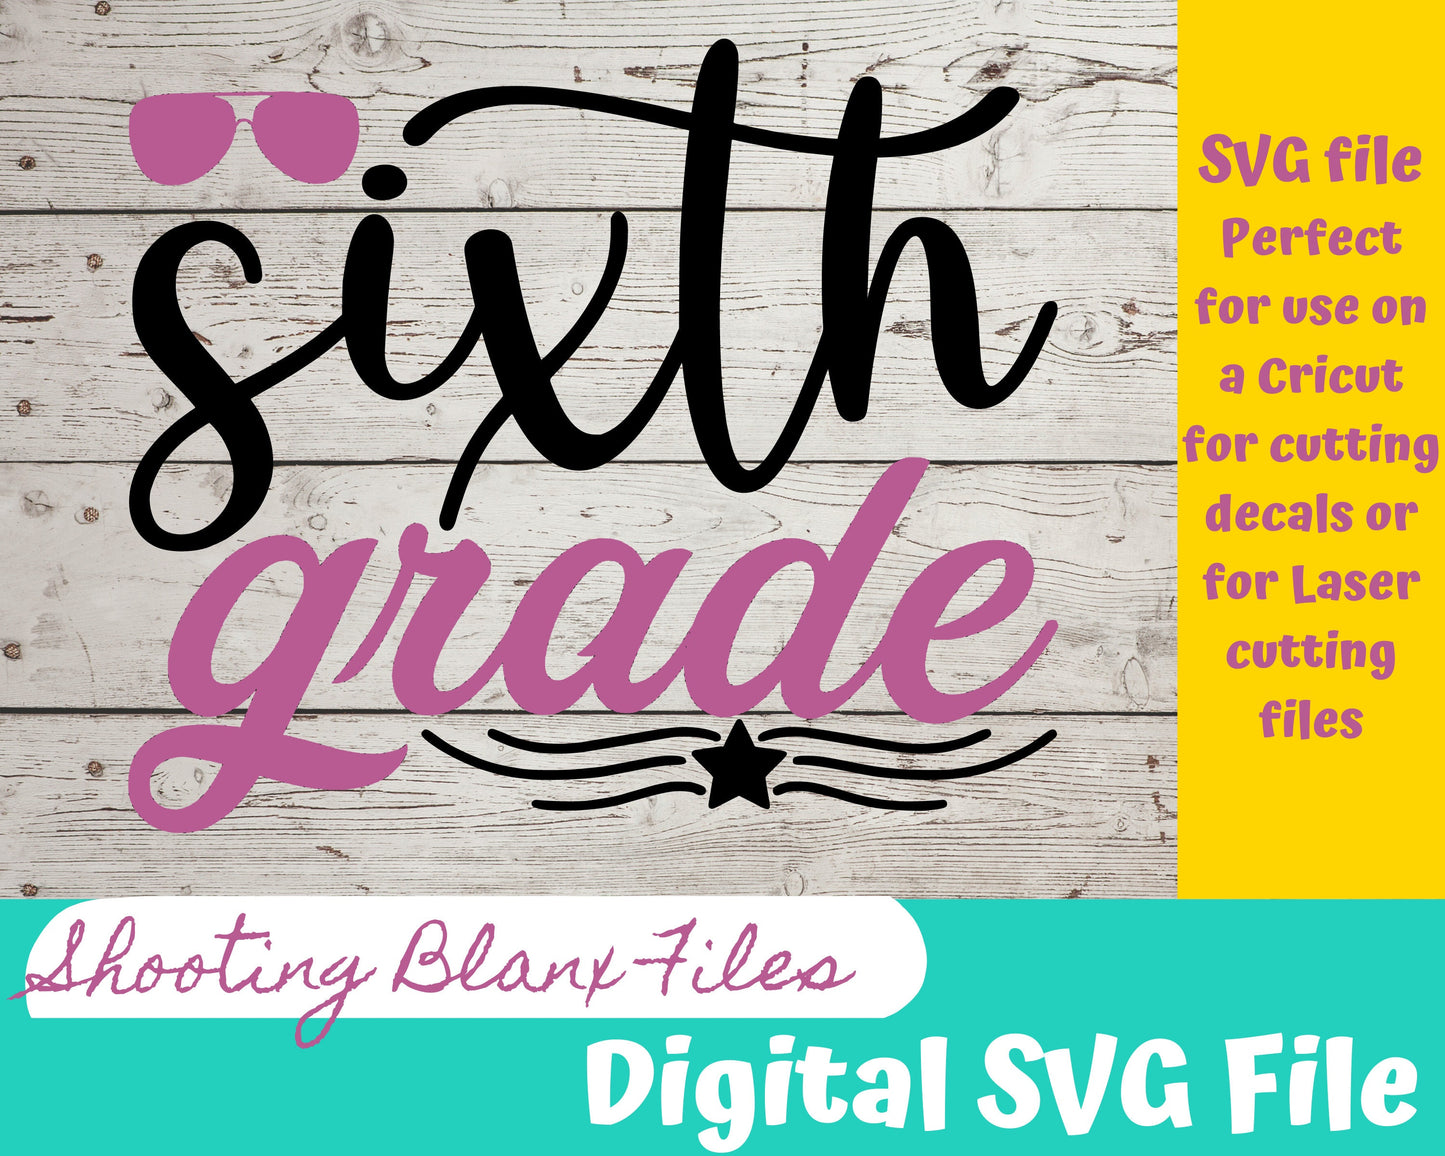 Sixth Grade Squade SVG file perfect for Cricut, Cameo, or Silhouette, laser engraving Glowforge, education, teachers week, school, 6th